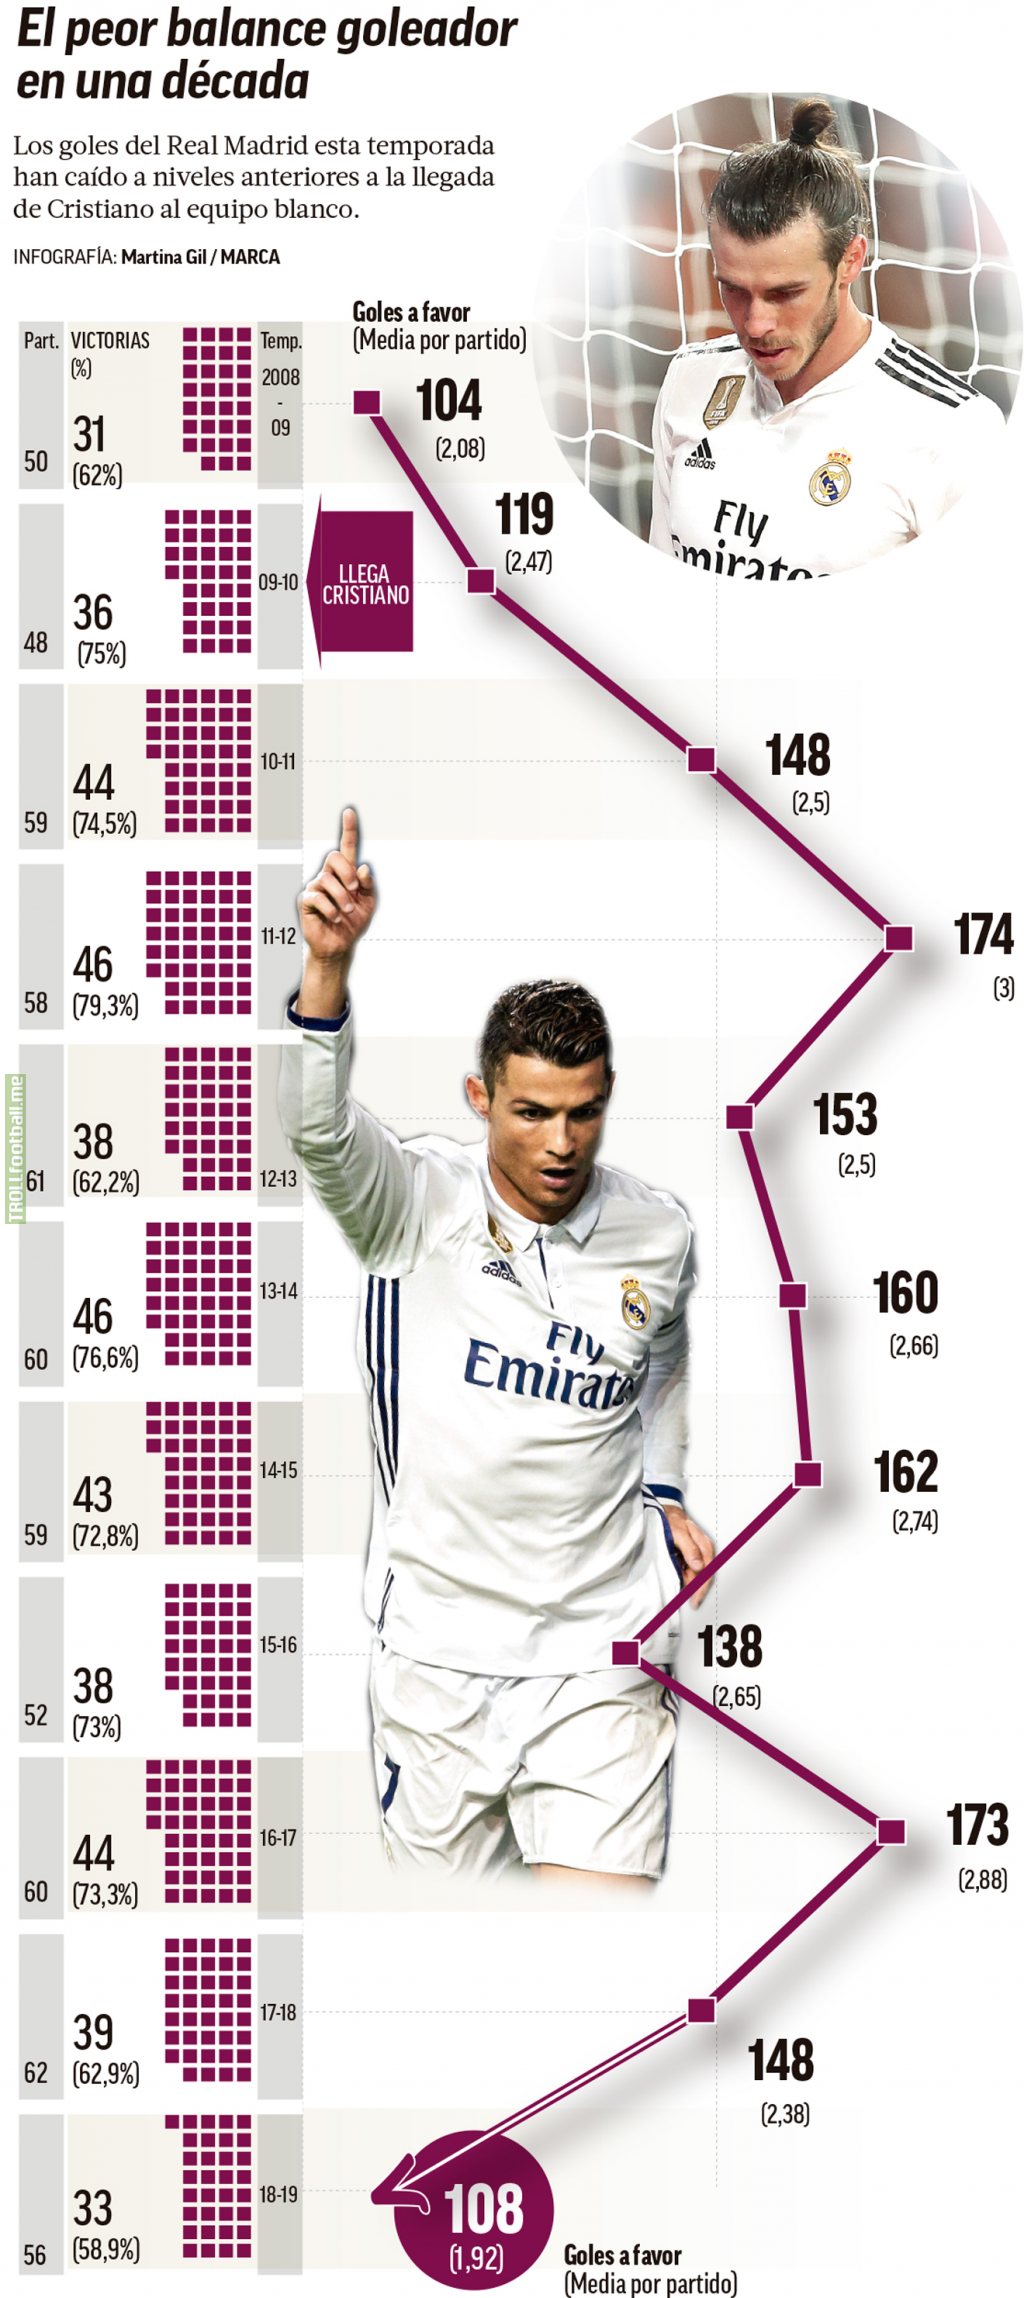 Real Madrid - With and Without Cristiano Ronaldo Difference (Goal and Matches Won stats)